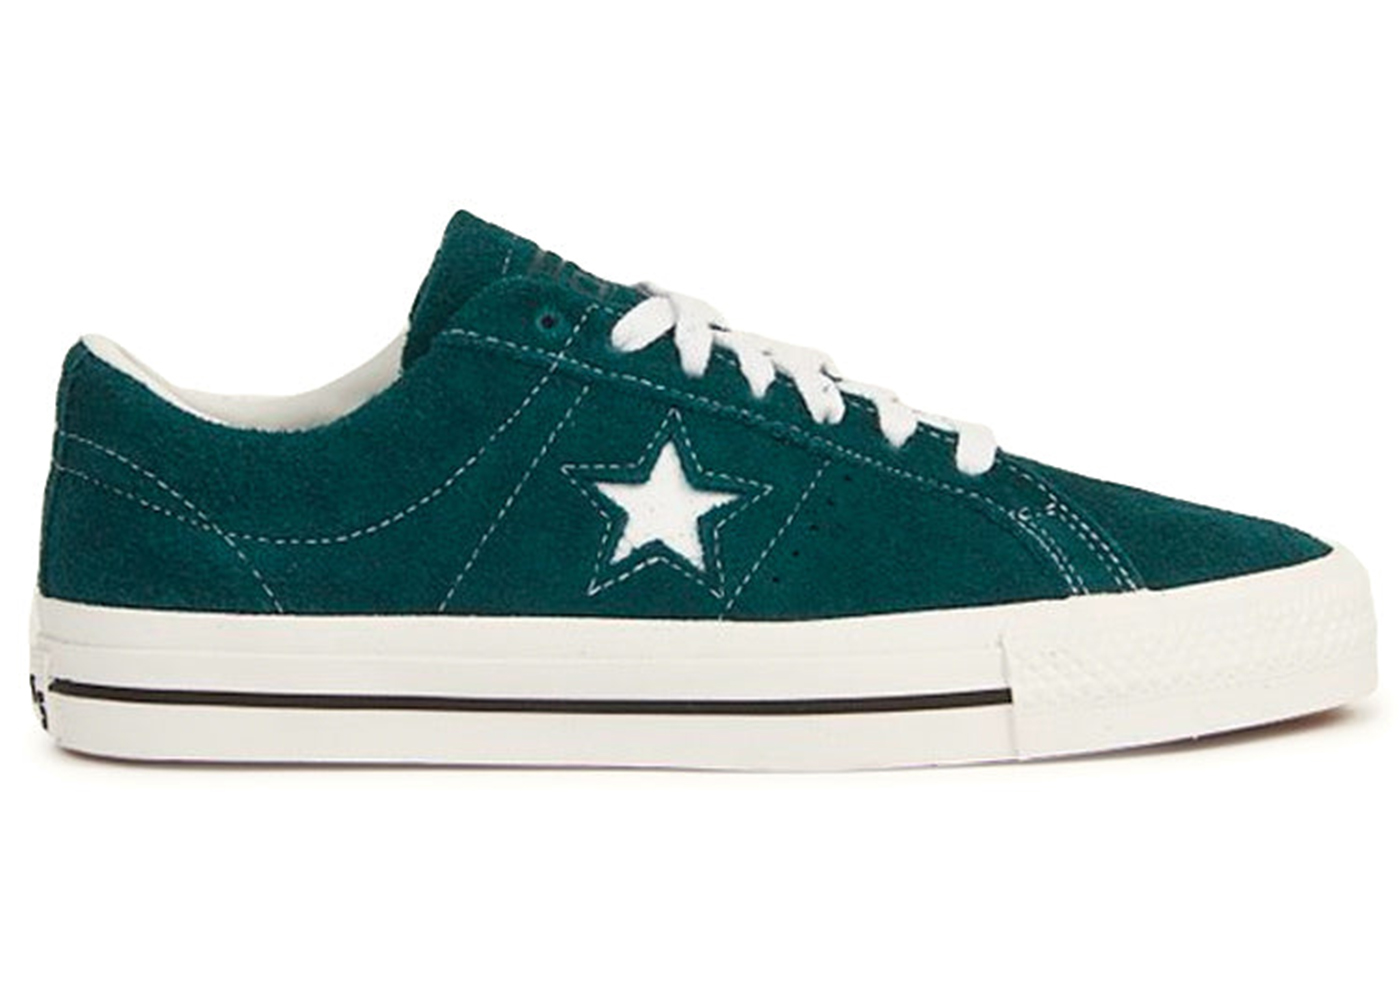 Converse One star Pro Midnight Turquoise Men's - A03218C - US